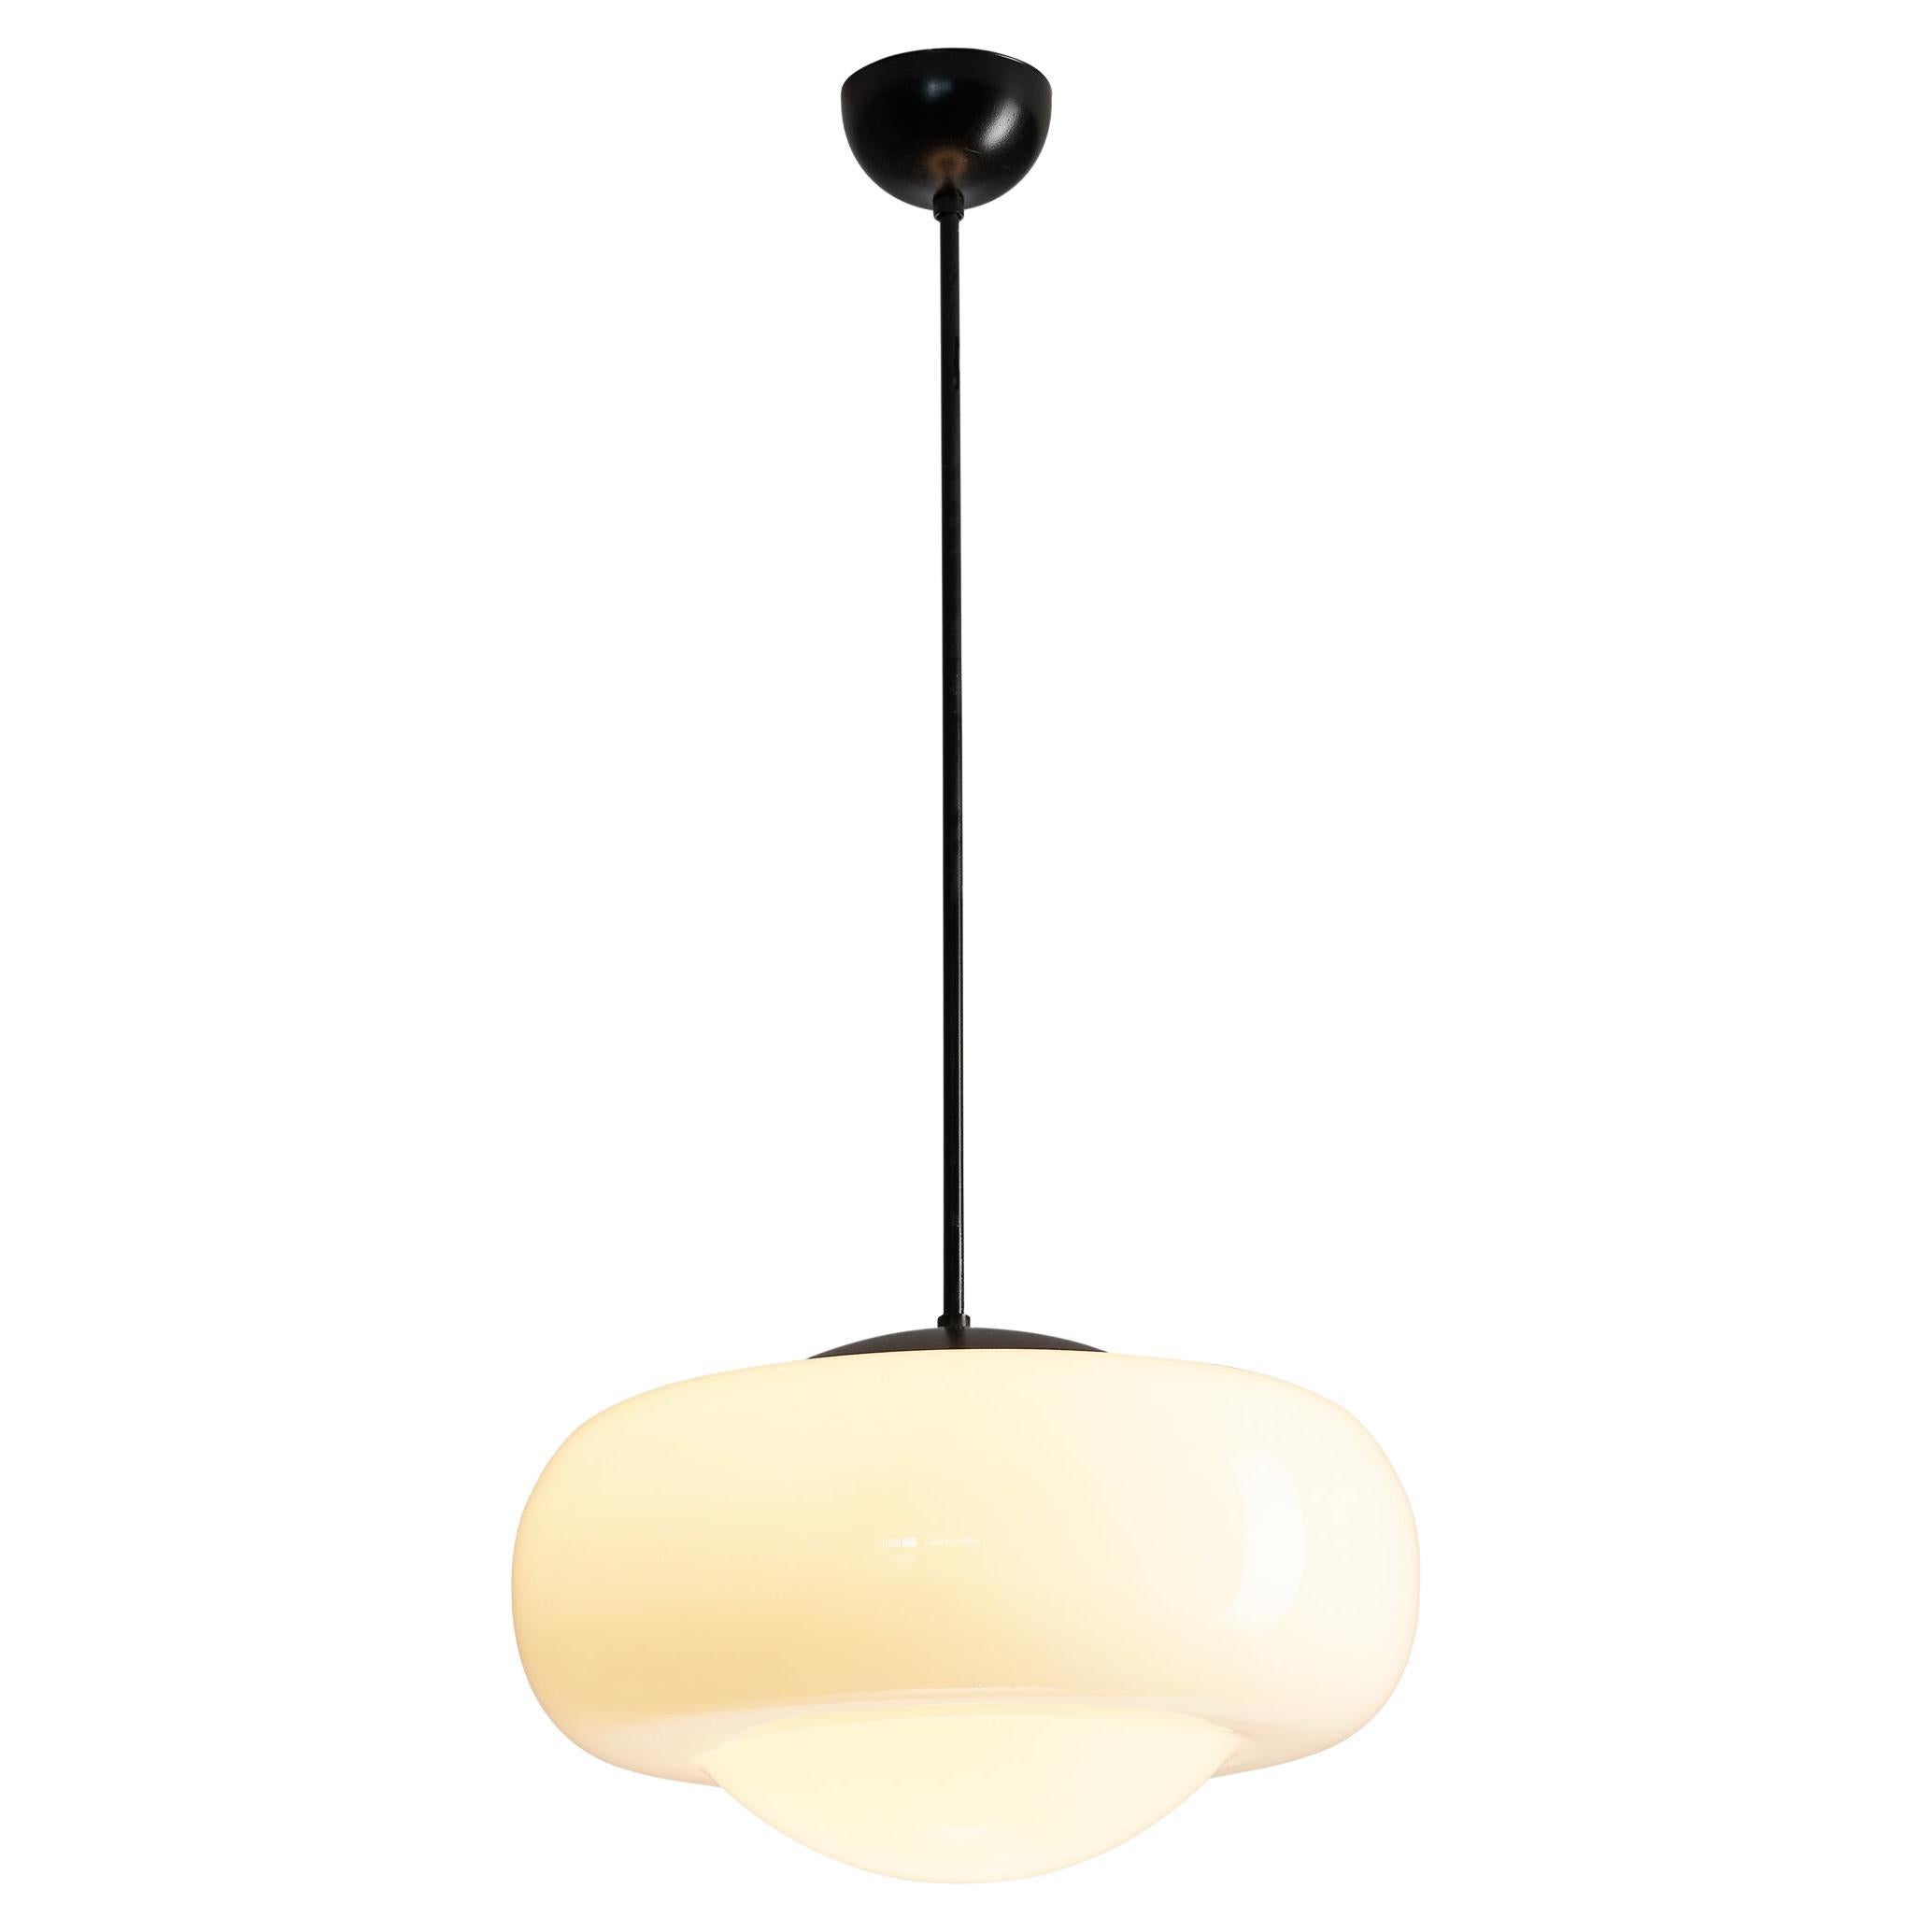 Pendant, opaline glass, metal, Europe, 1960s. 

Eccentric pendant with an oval shaped frosted glass shade. A nice detail of its design is the round shaped bottom side. A black lacquered metal canopy attaches the lamp to the ceiling. Due to the